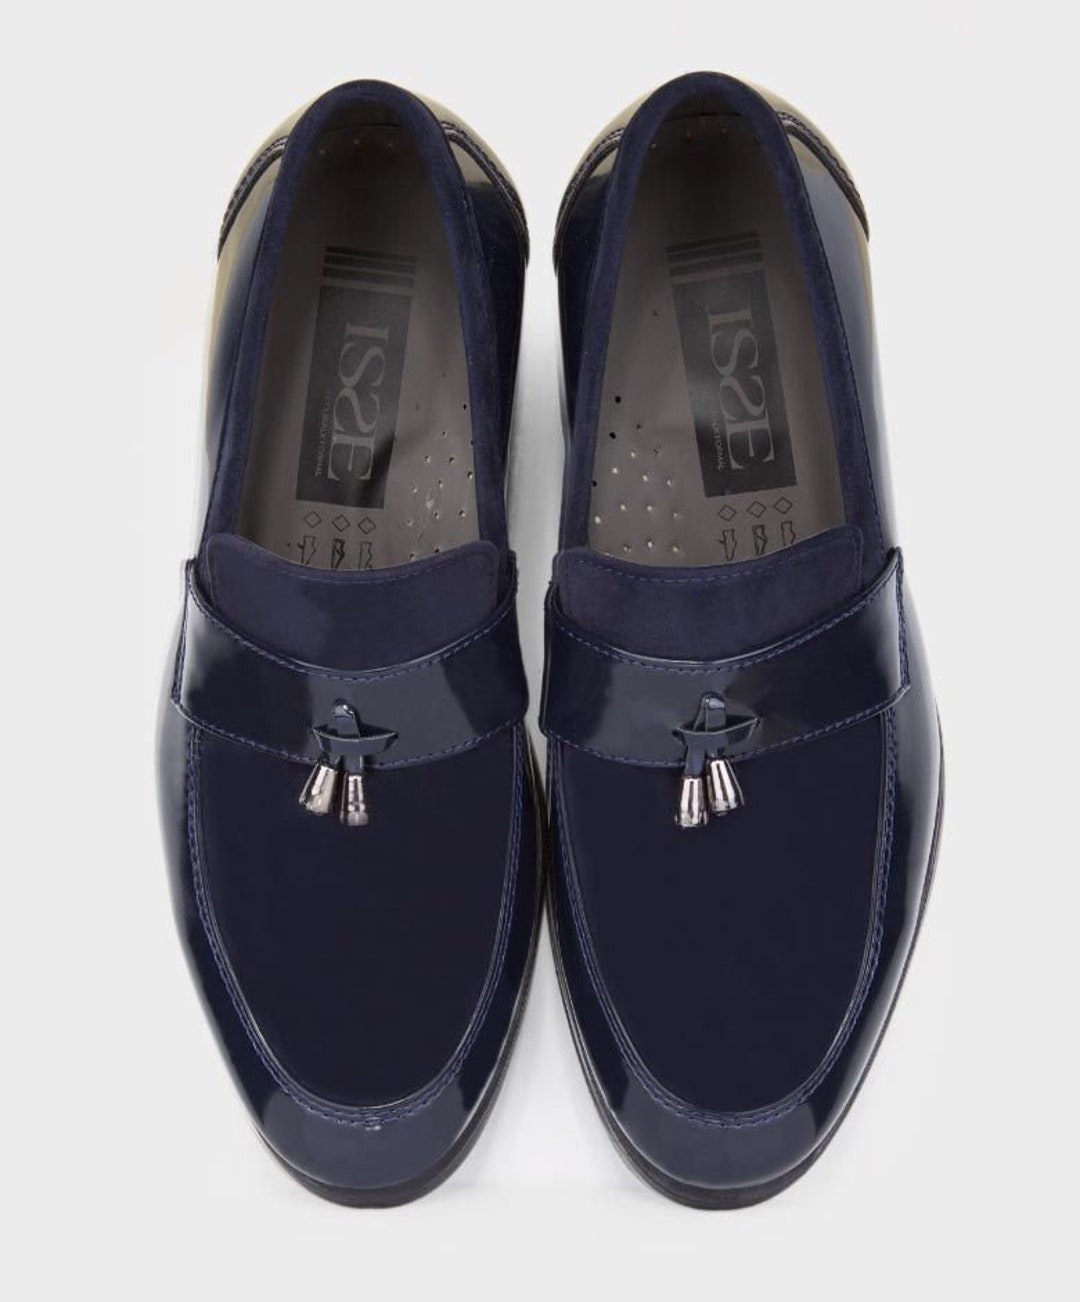 Flamingo Boys Patent & Suede Loafers in Navy Blue - Etsy